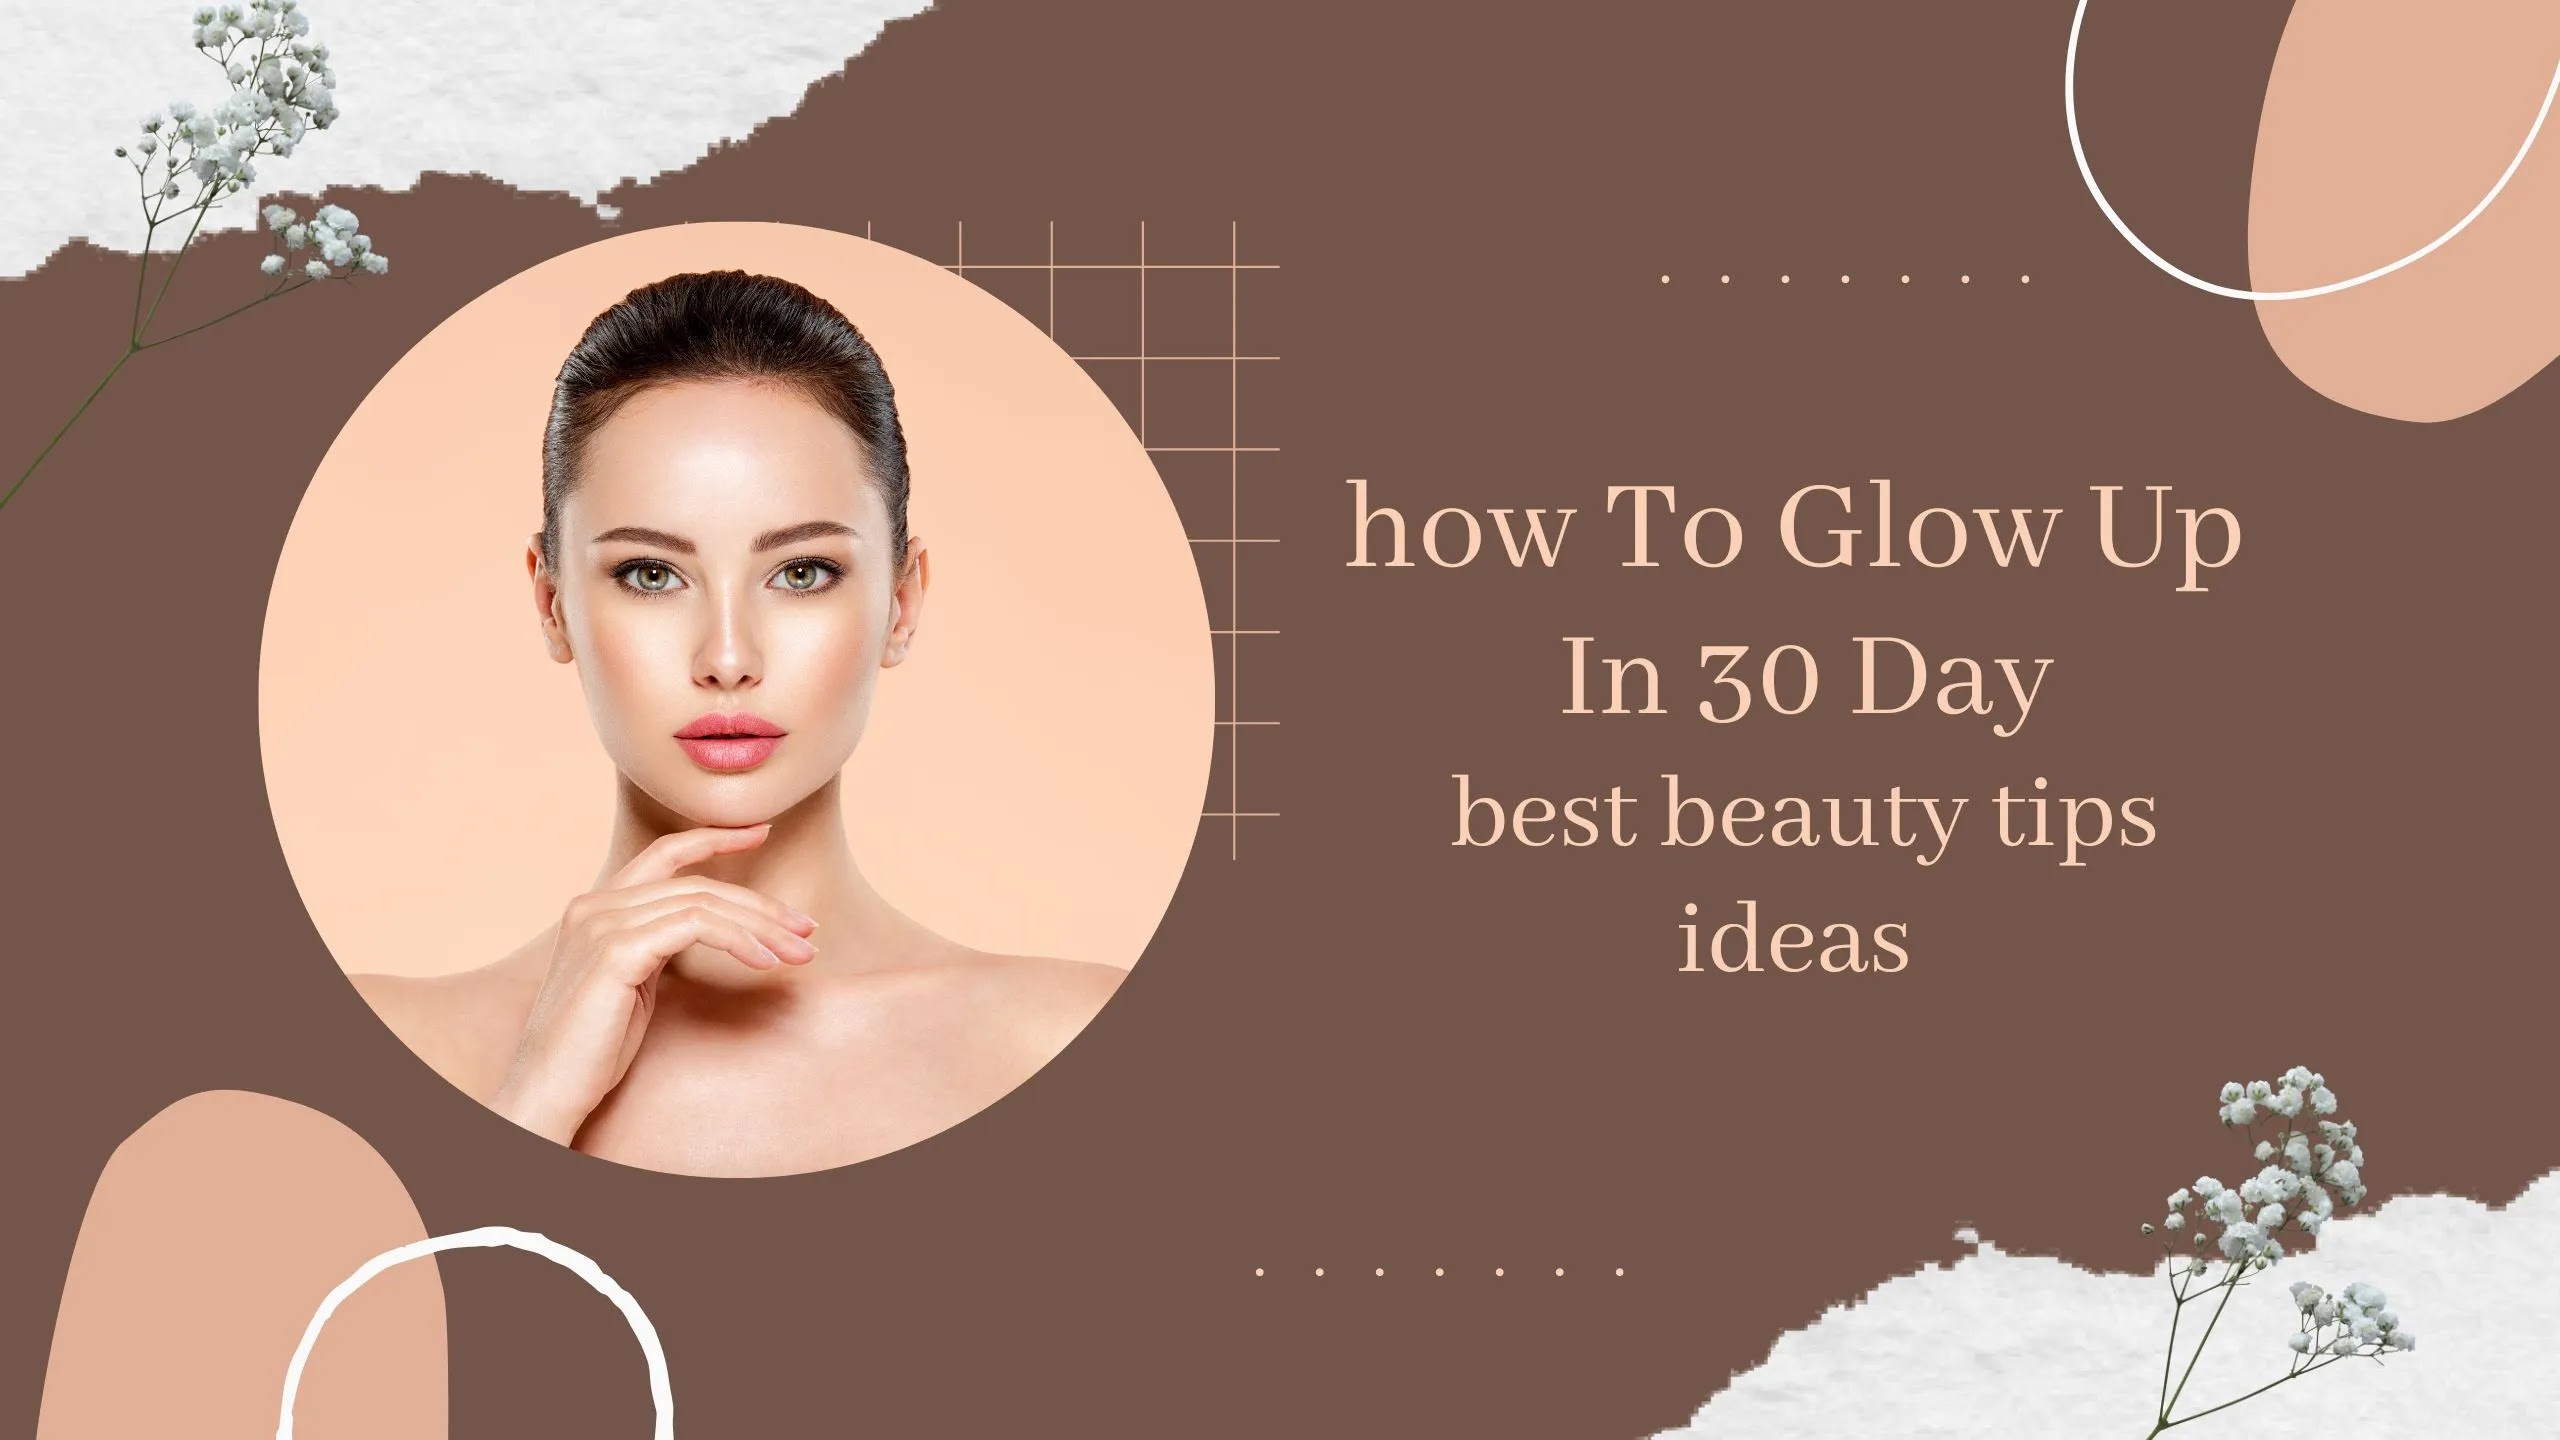 How To Glow Up In 30 Day best beauty tips ideas